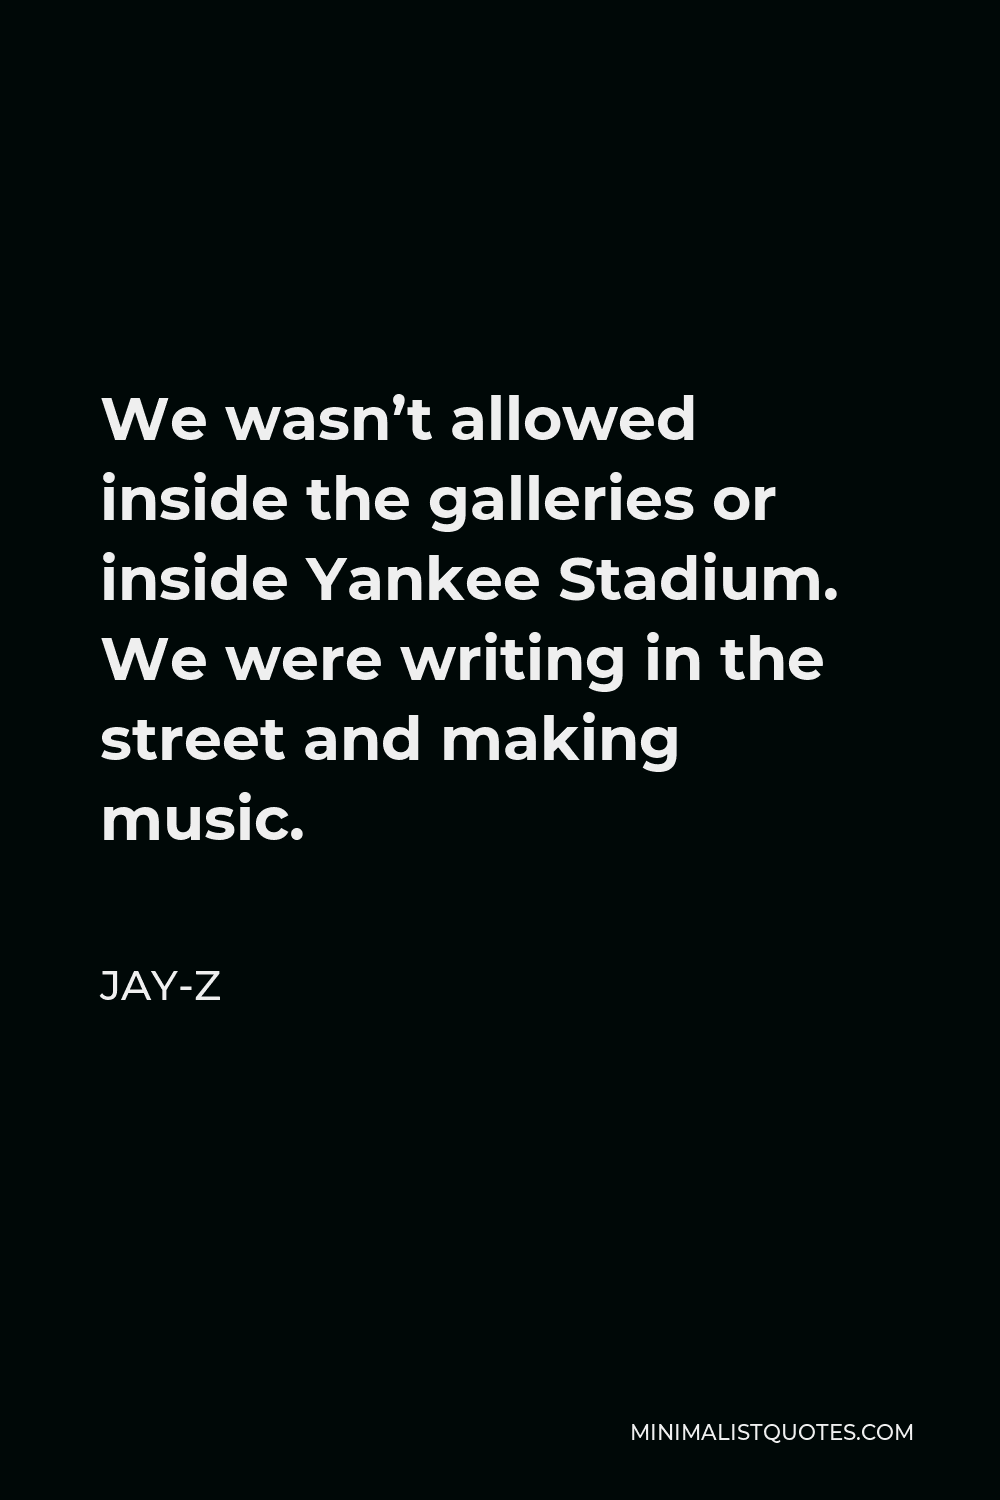 Jay-Z Quote - We wasn’t allowed inside the galleries or inside Yankee Stadium. We were writing in the street and making music.